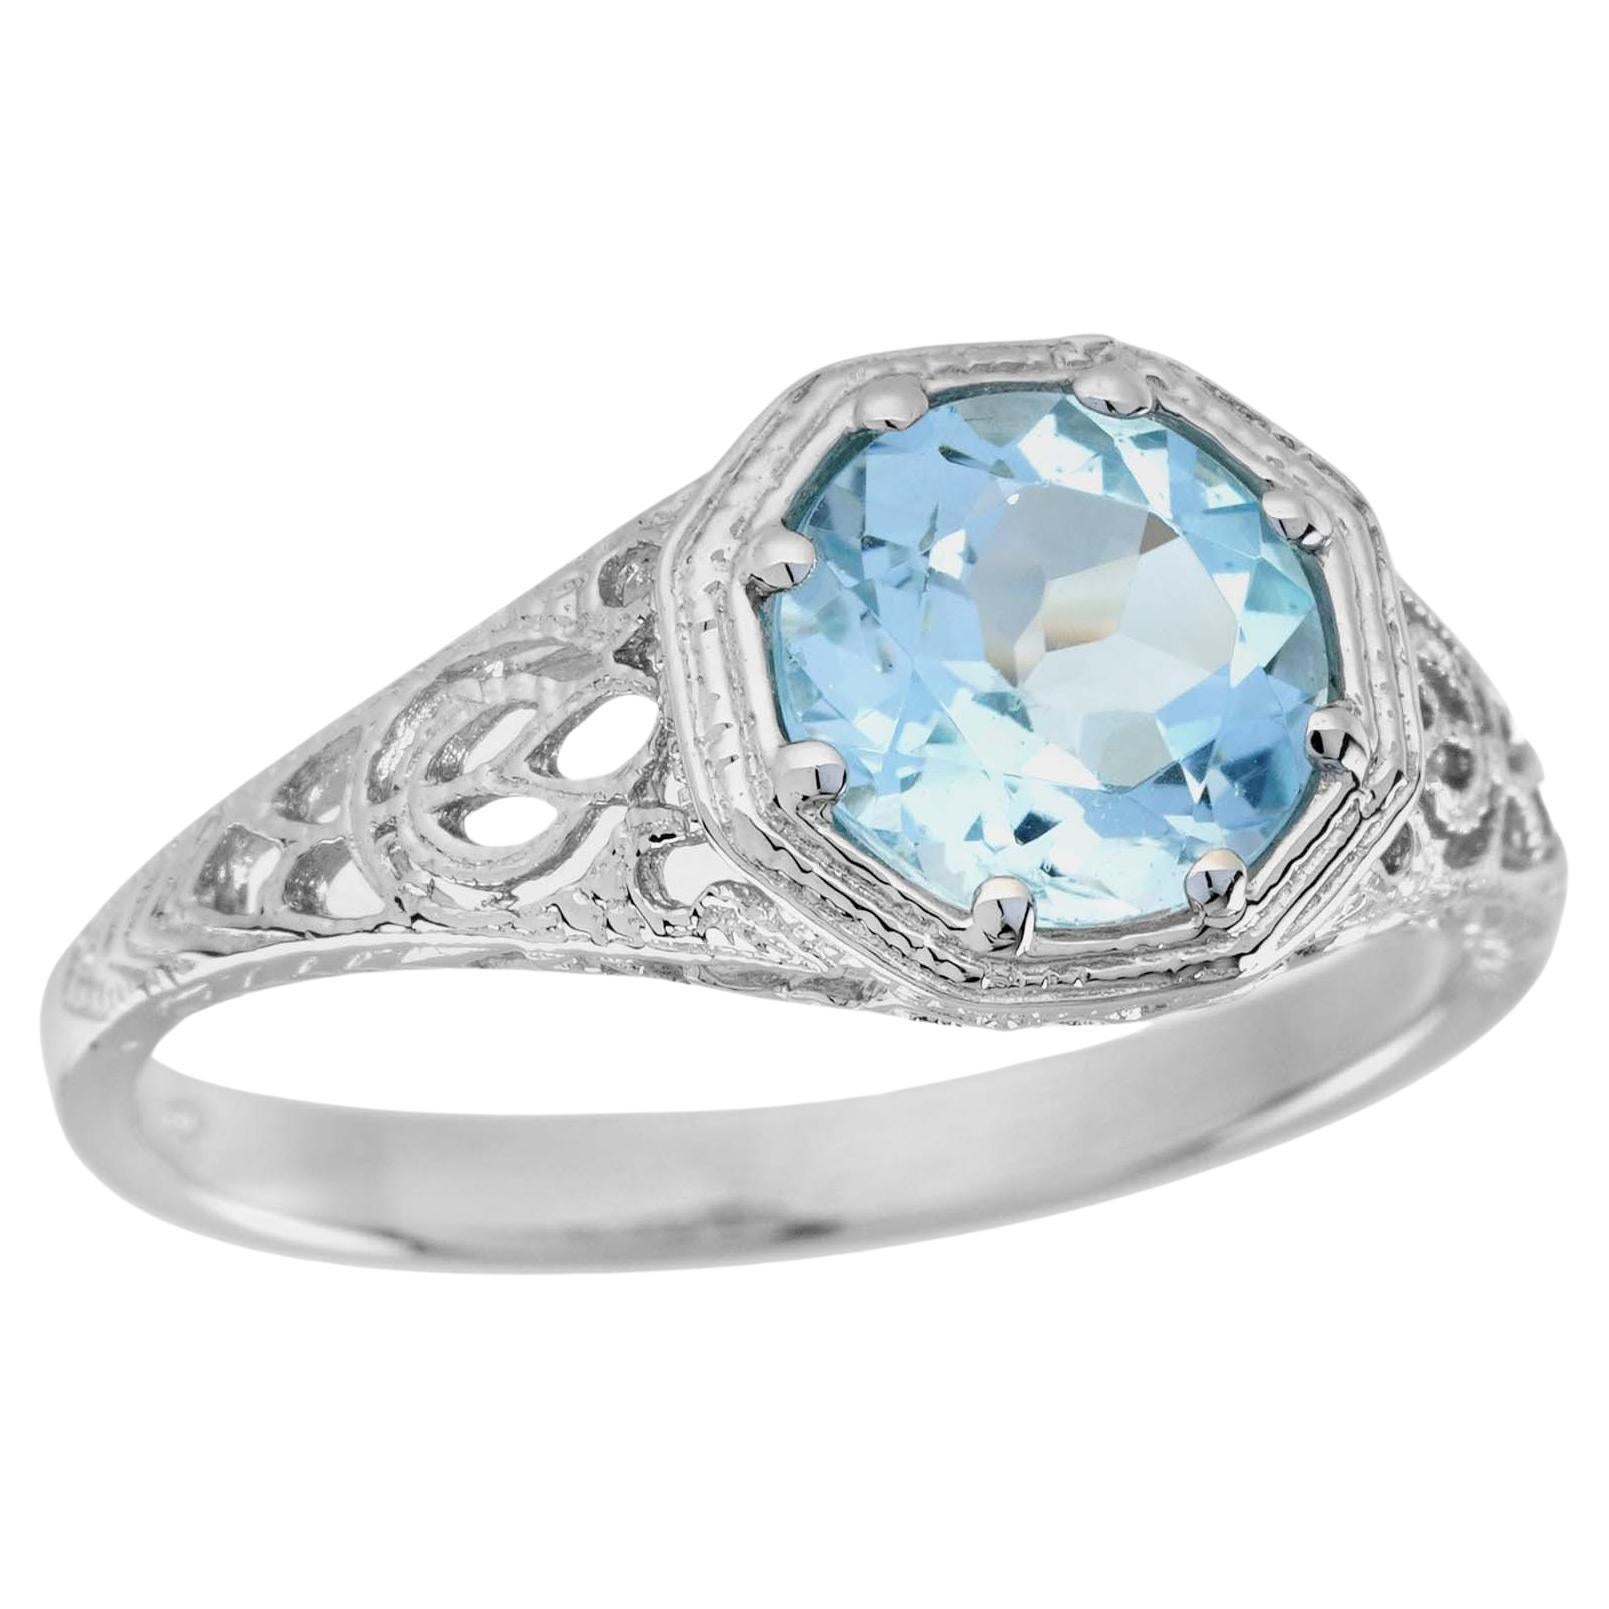 For Sale:  Natural Blue Topaz Vintage Style Eight Prong Ring in Solid 9K White Gold